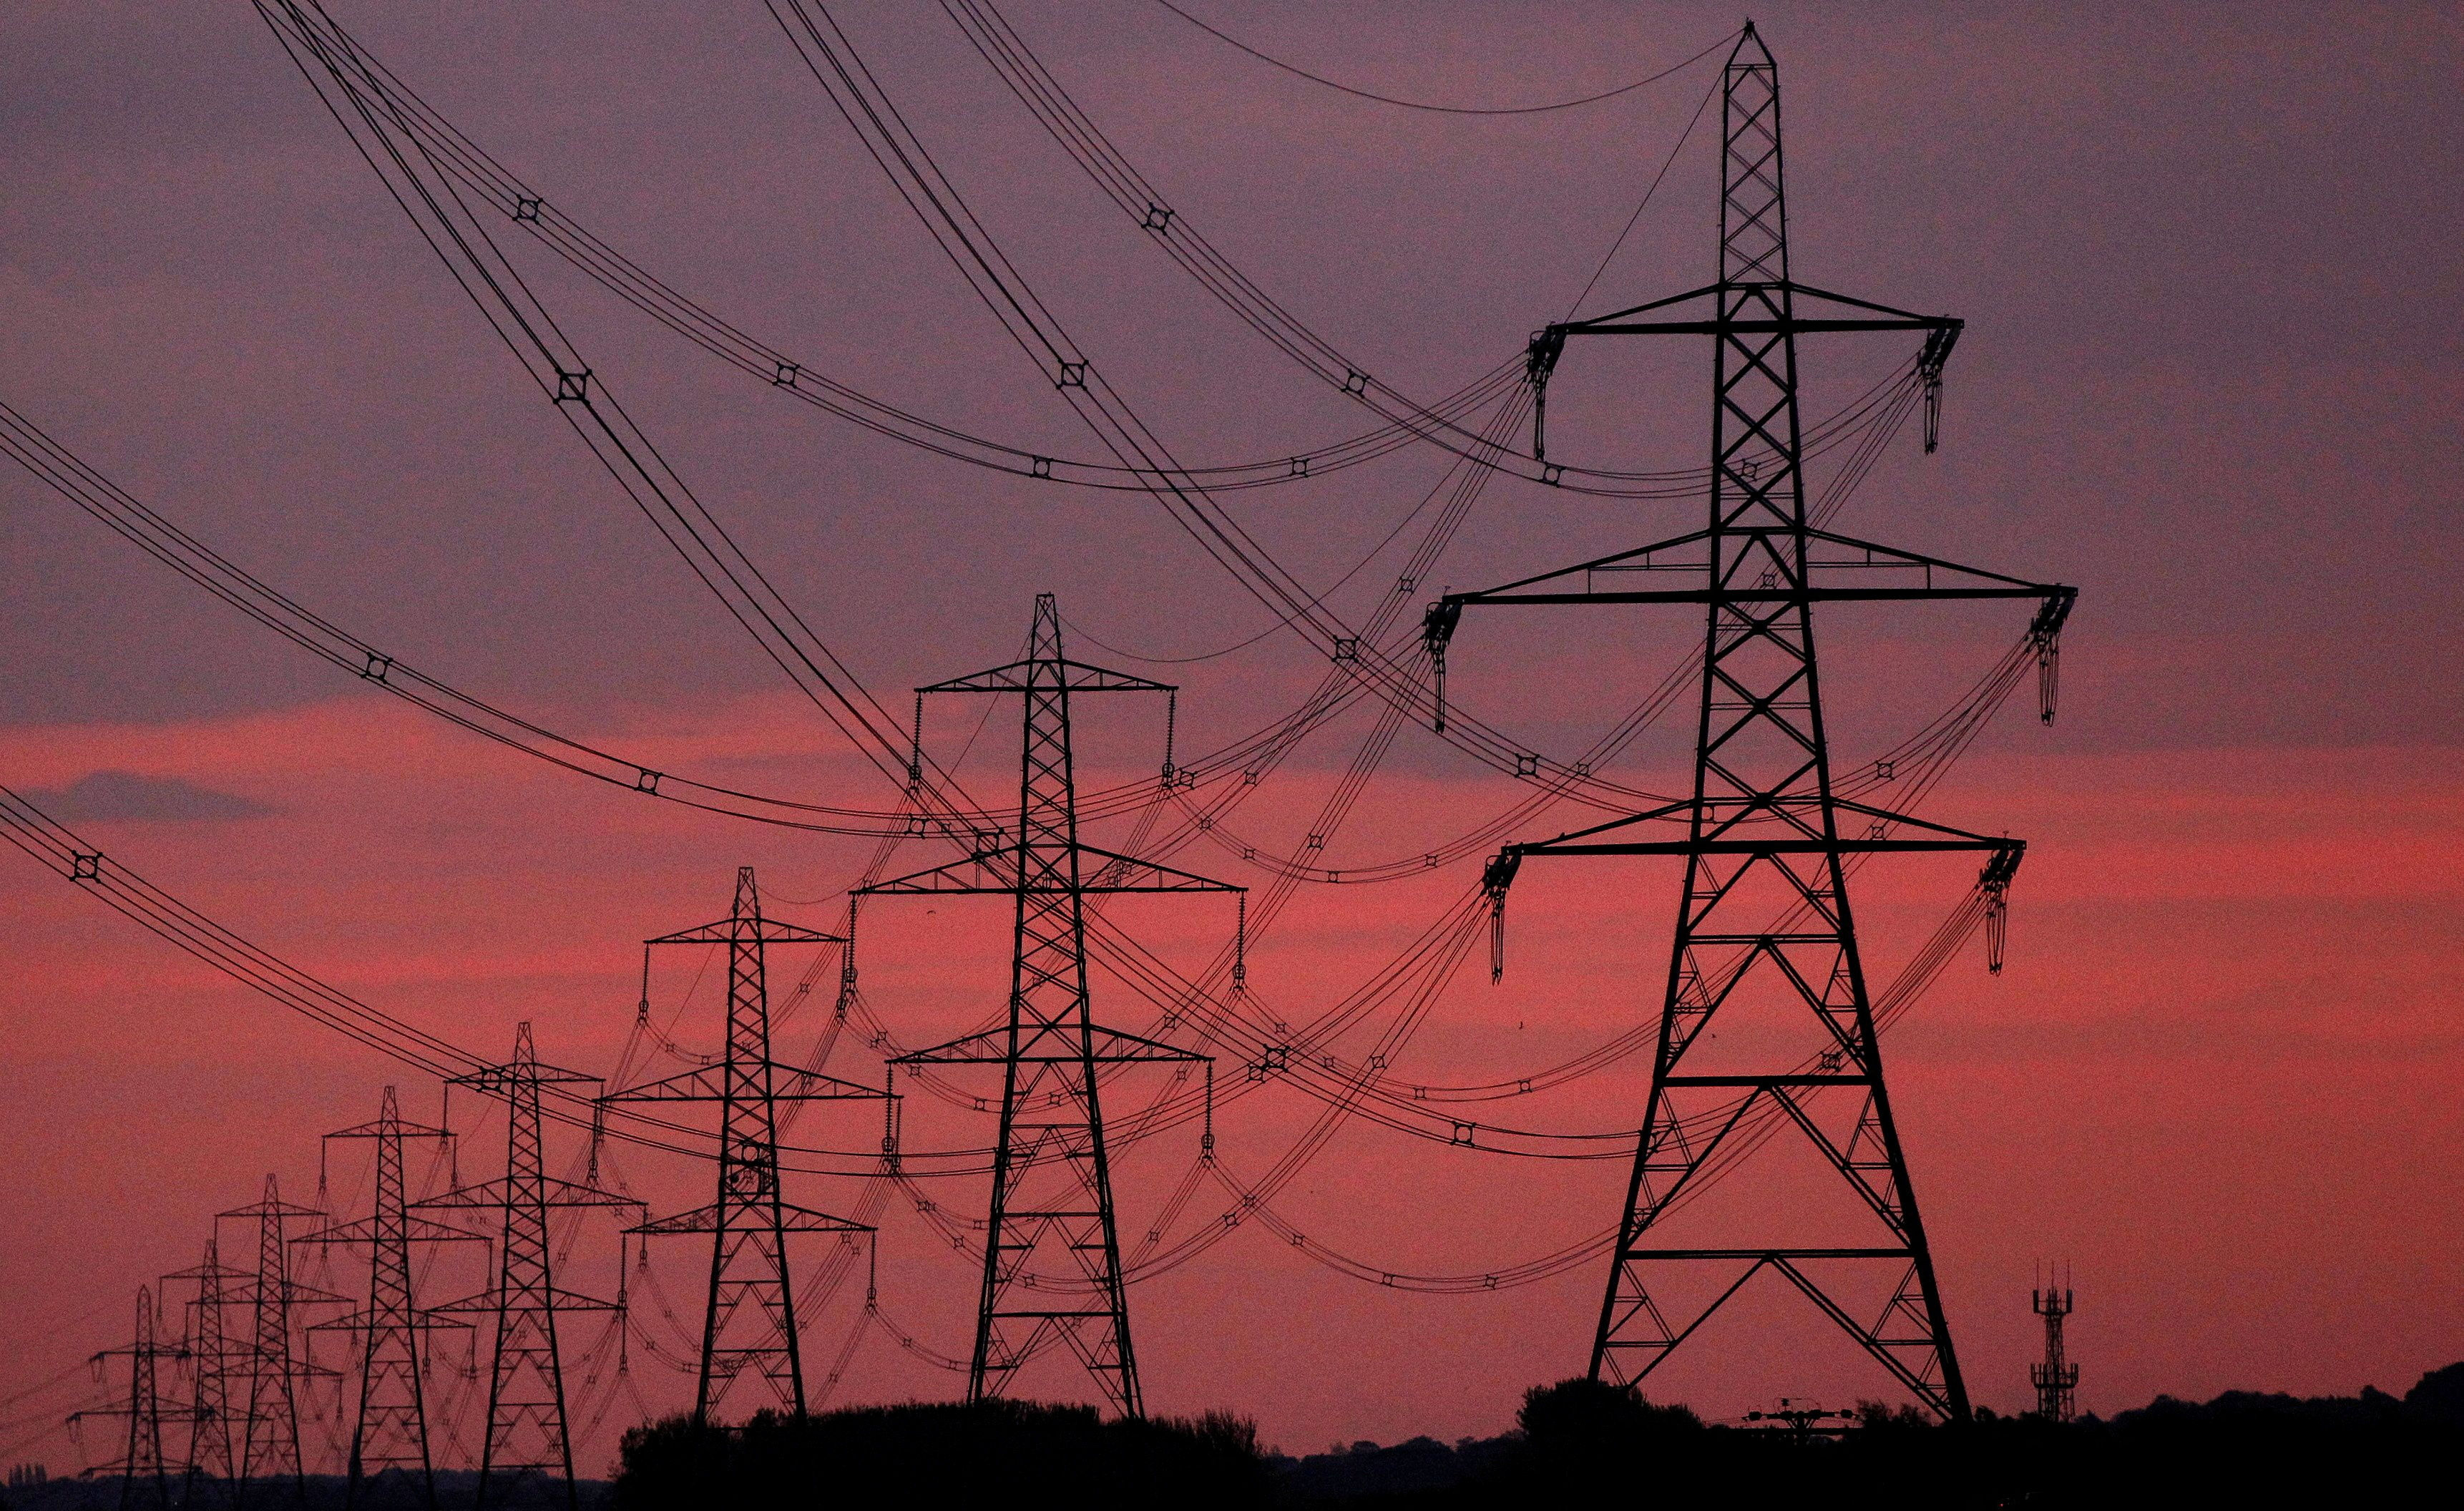 The sun rises behind electricity pylons near Chester